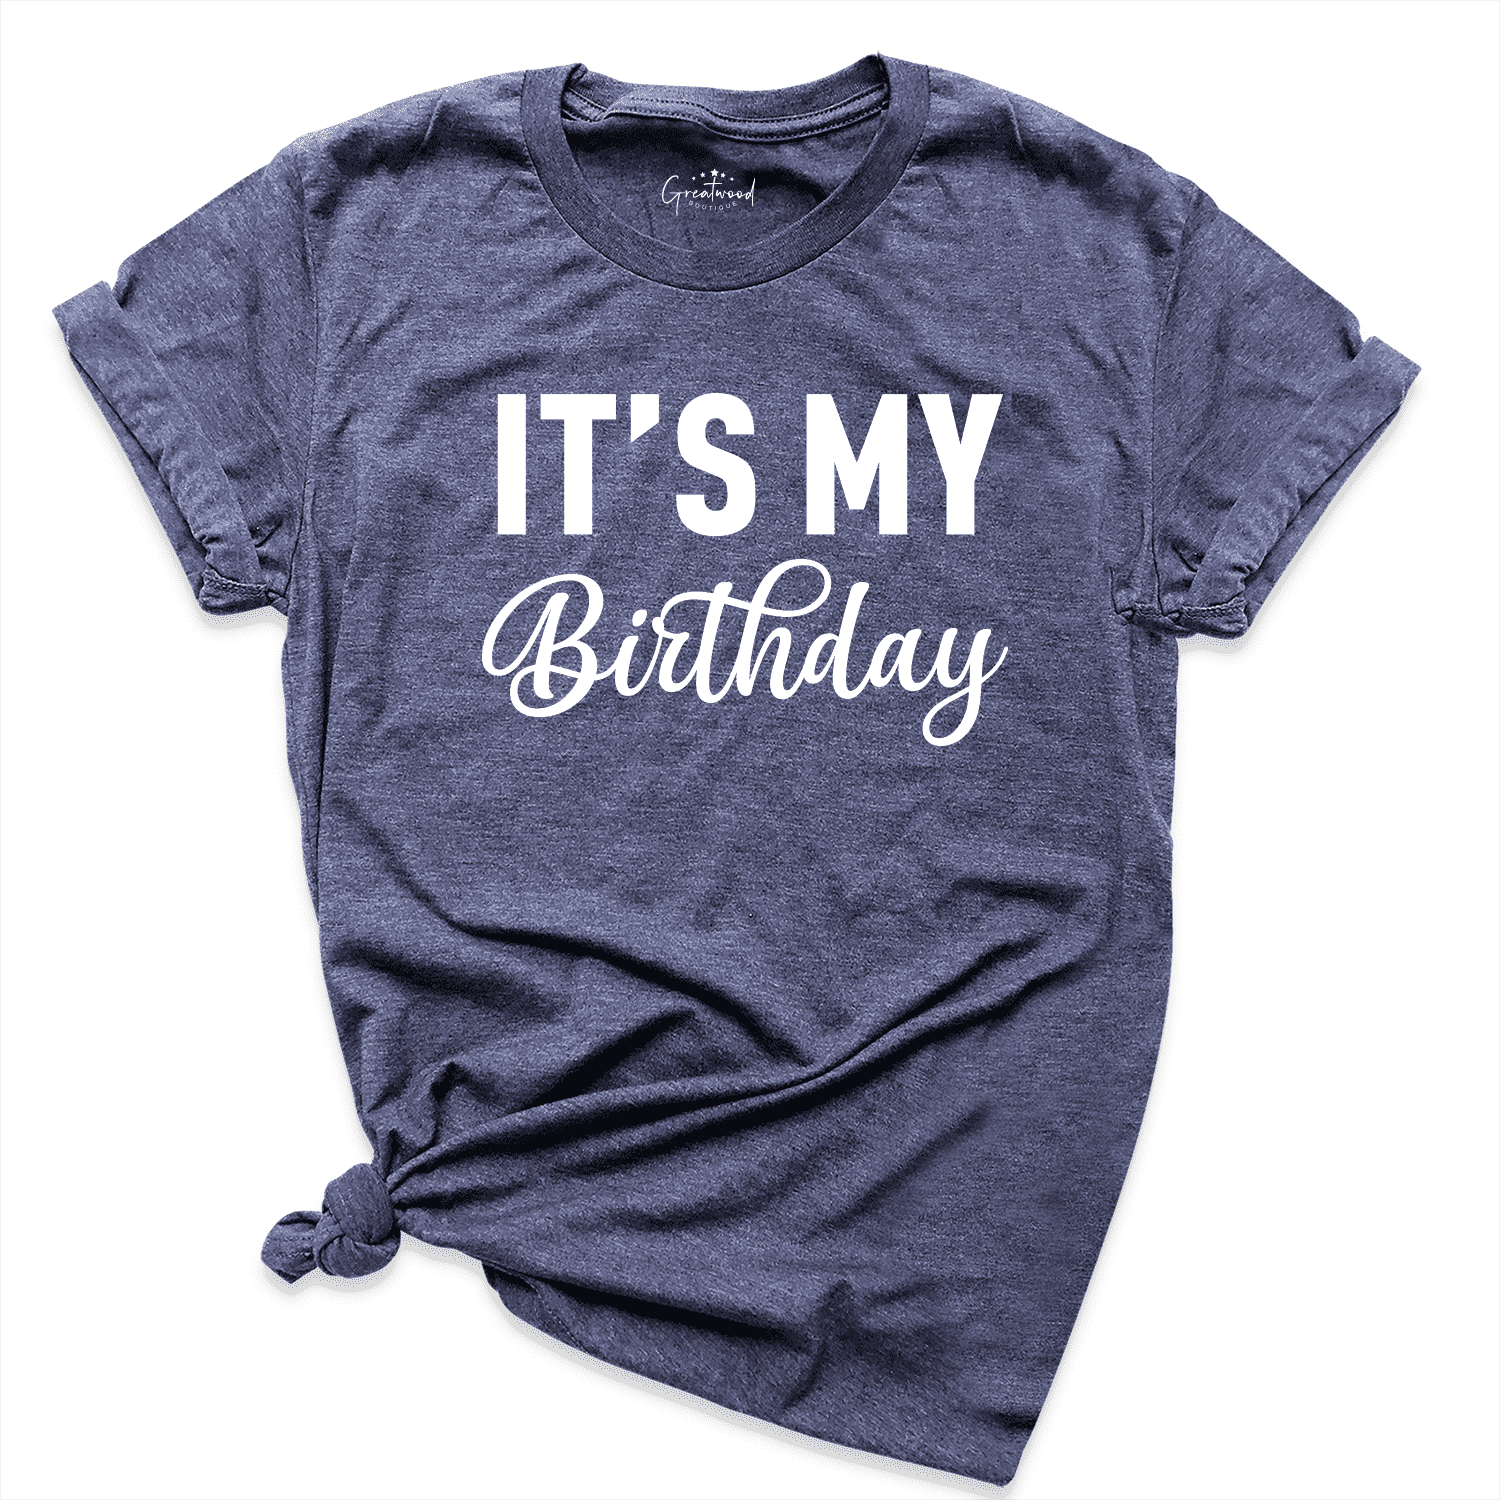 It's my Birthday Shirt Navy - Greatwood Boutique